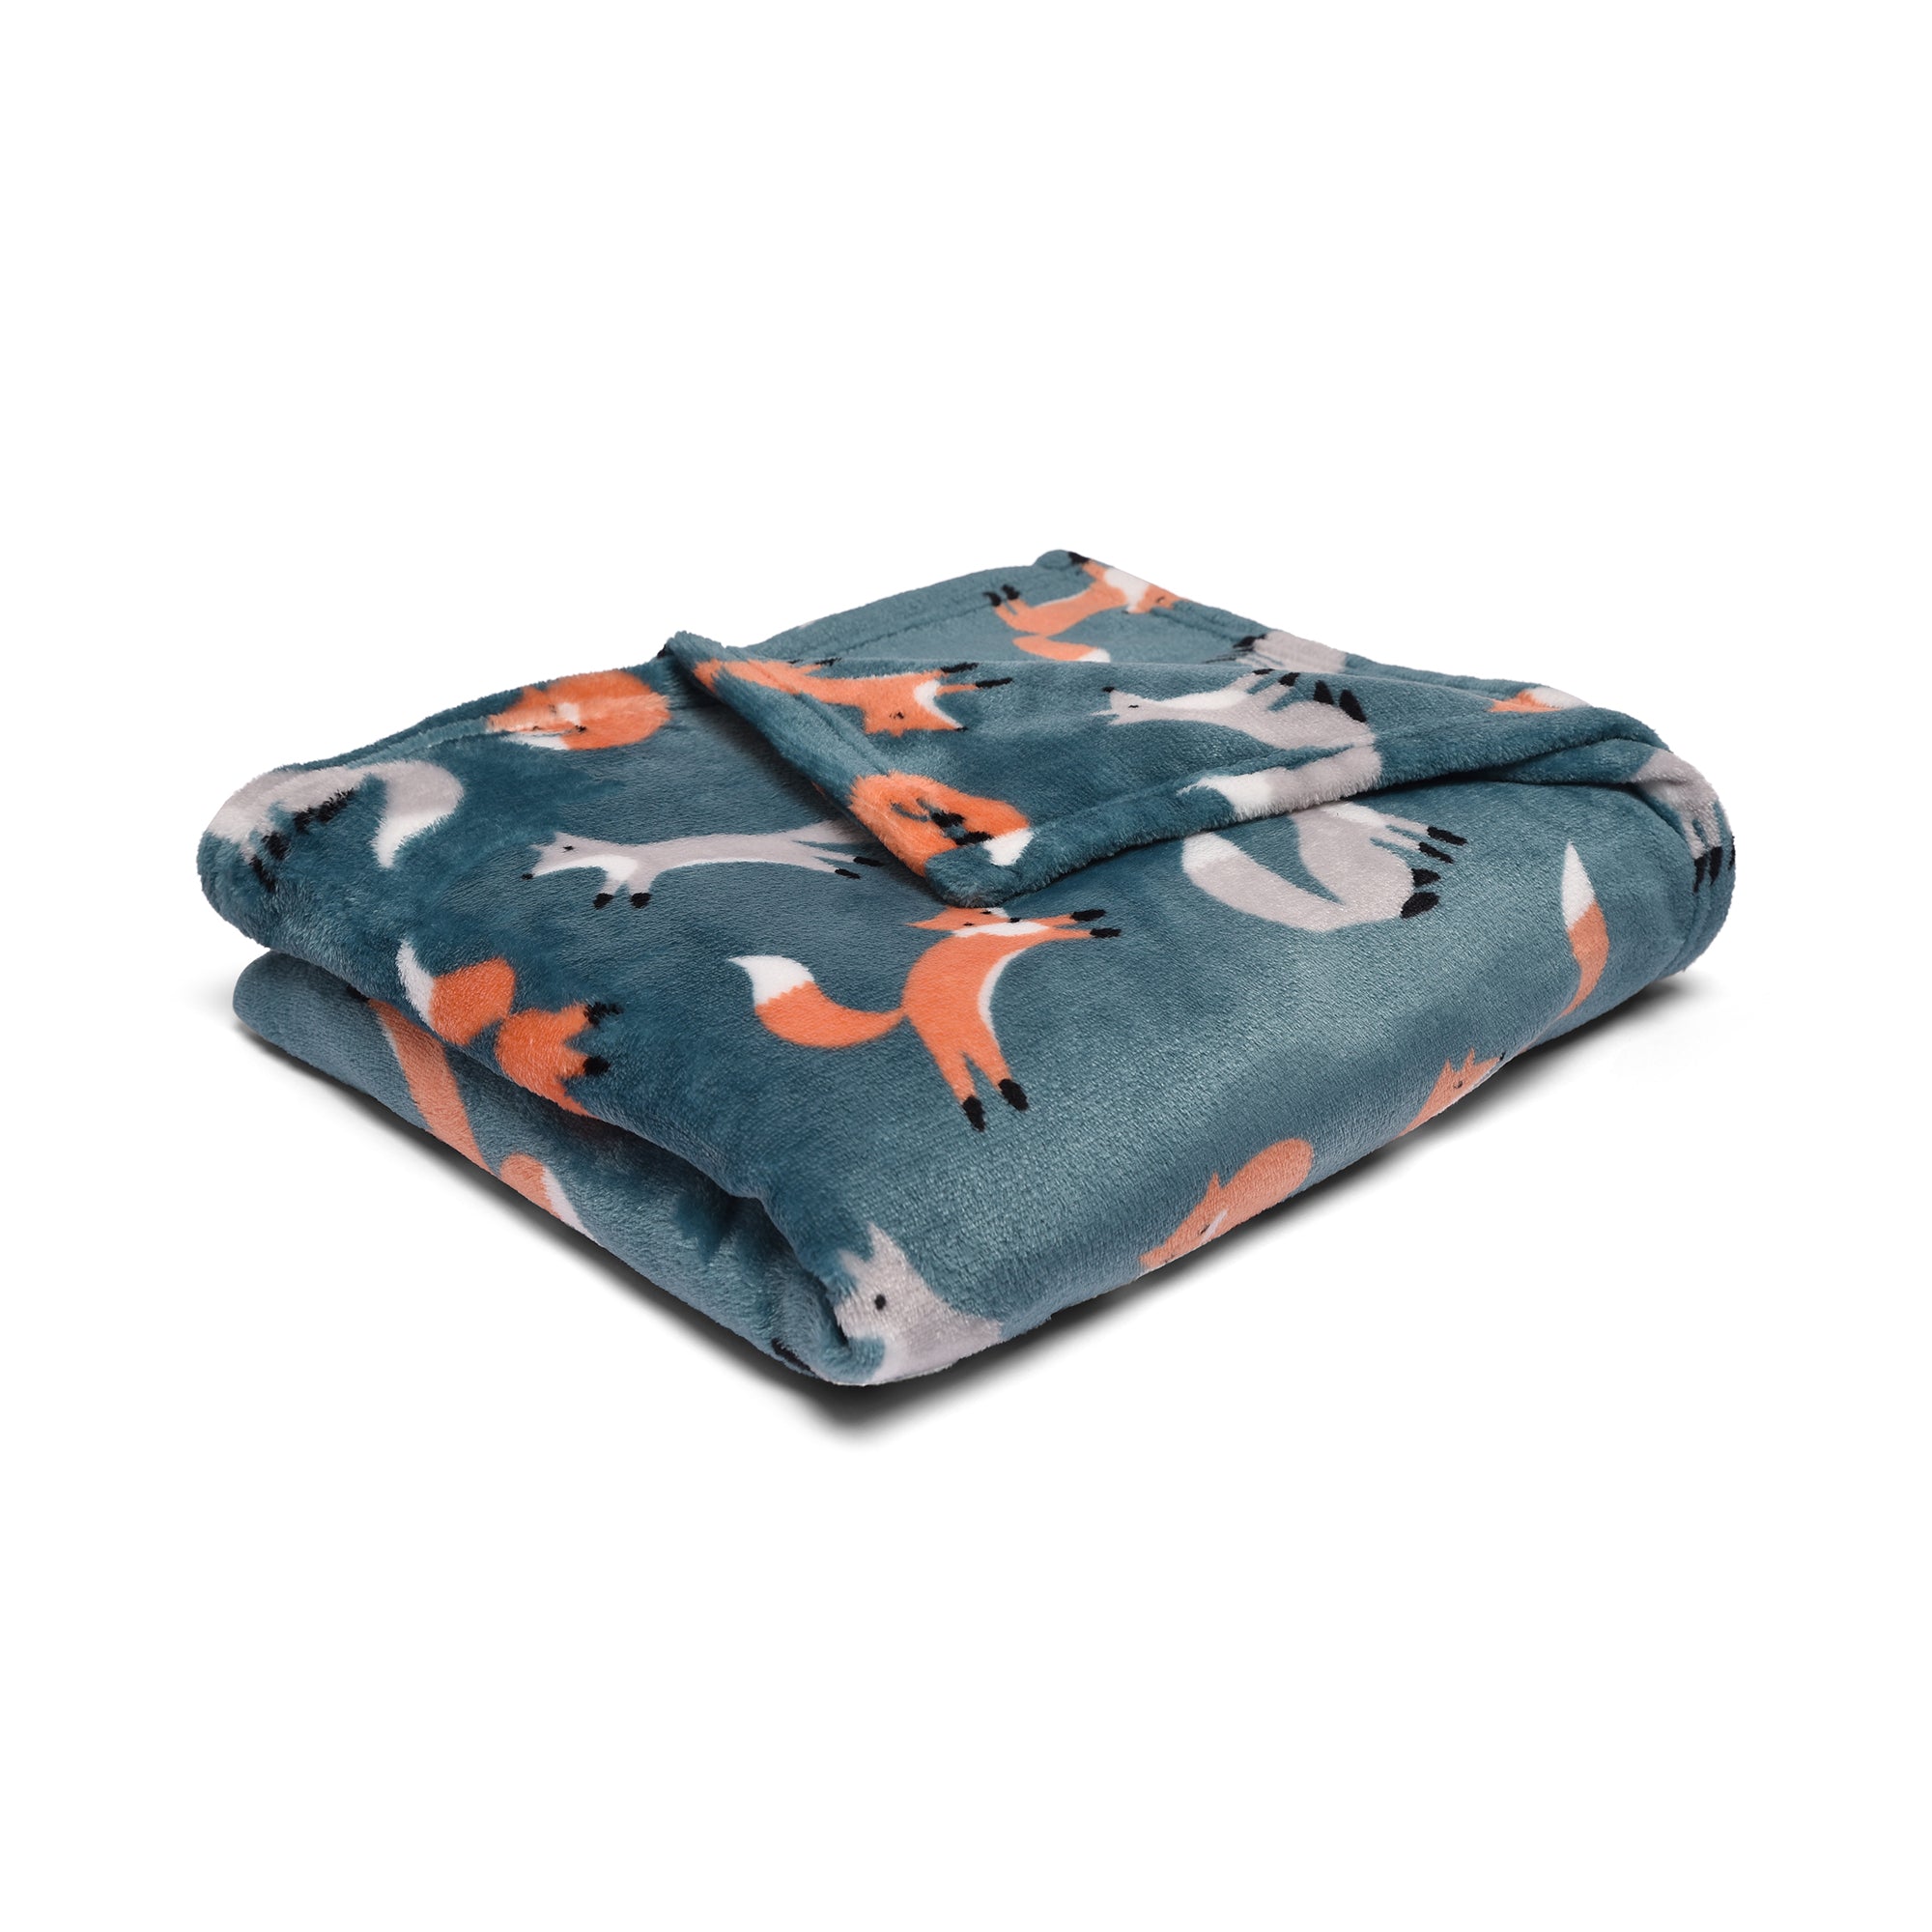 Throw Foraging Fox by Fusion Snug in Teal